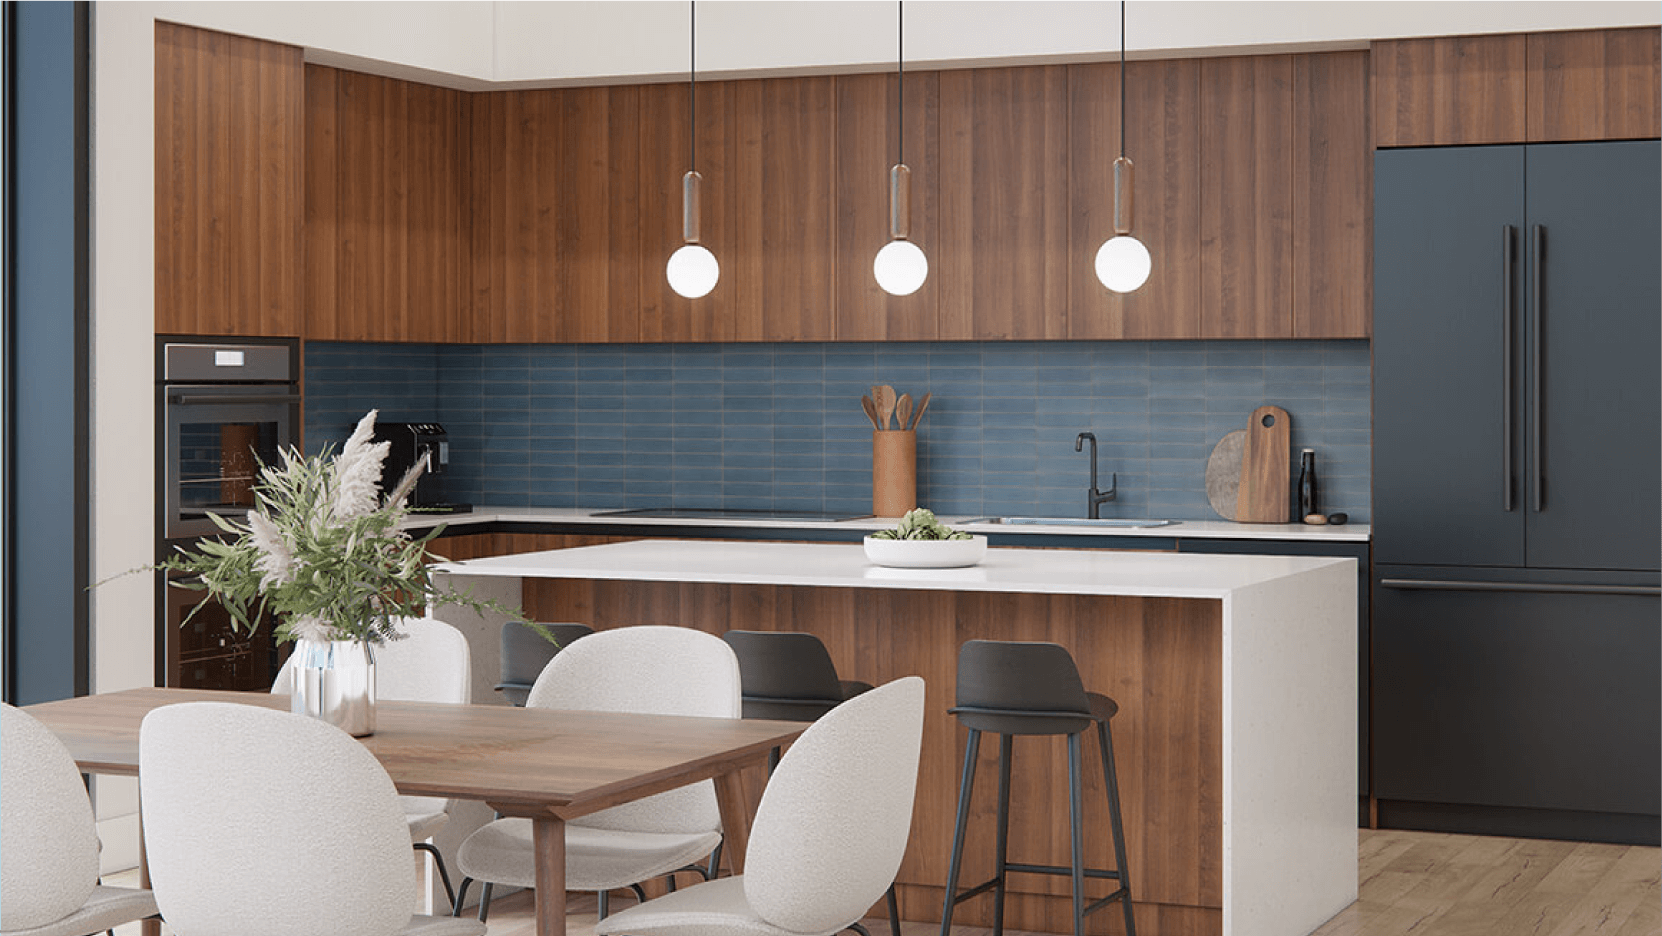 Sleek kitchen with dark wood cabinets and blue tile backsplash, integrated with a spacious dining area featuring a wooden table and modern chairs in a bright condo setting.